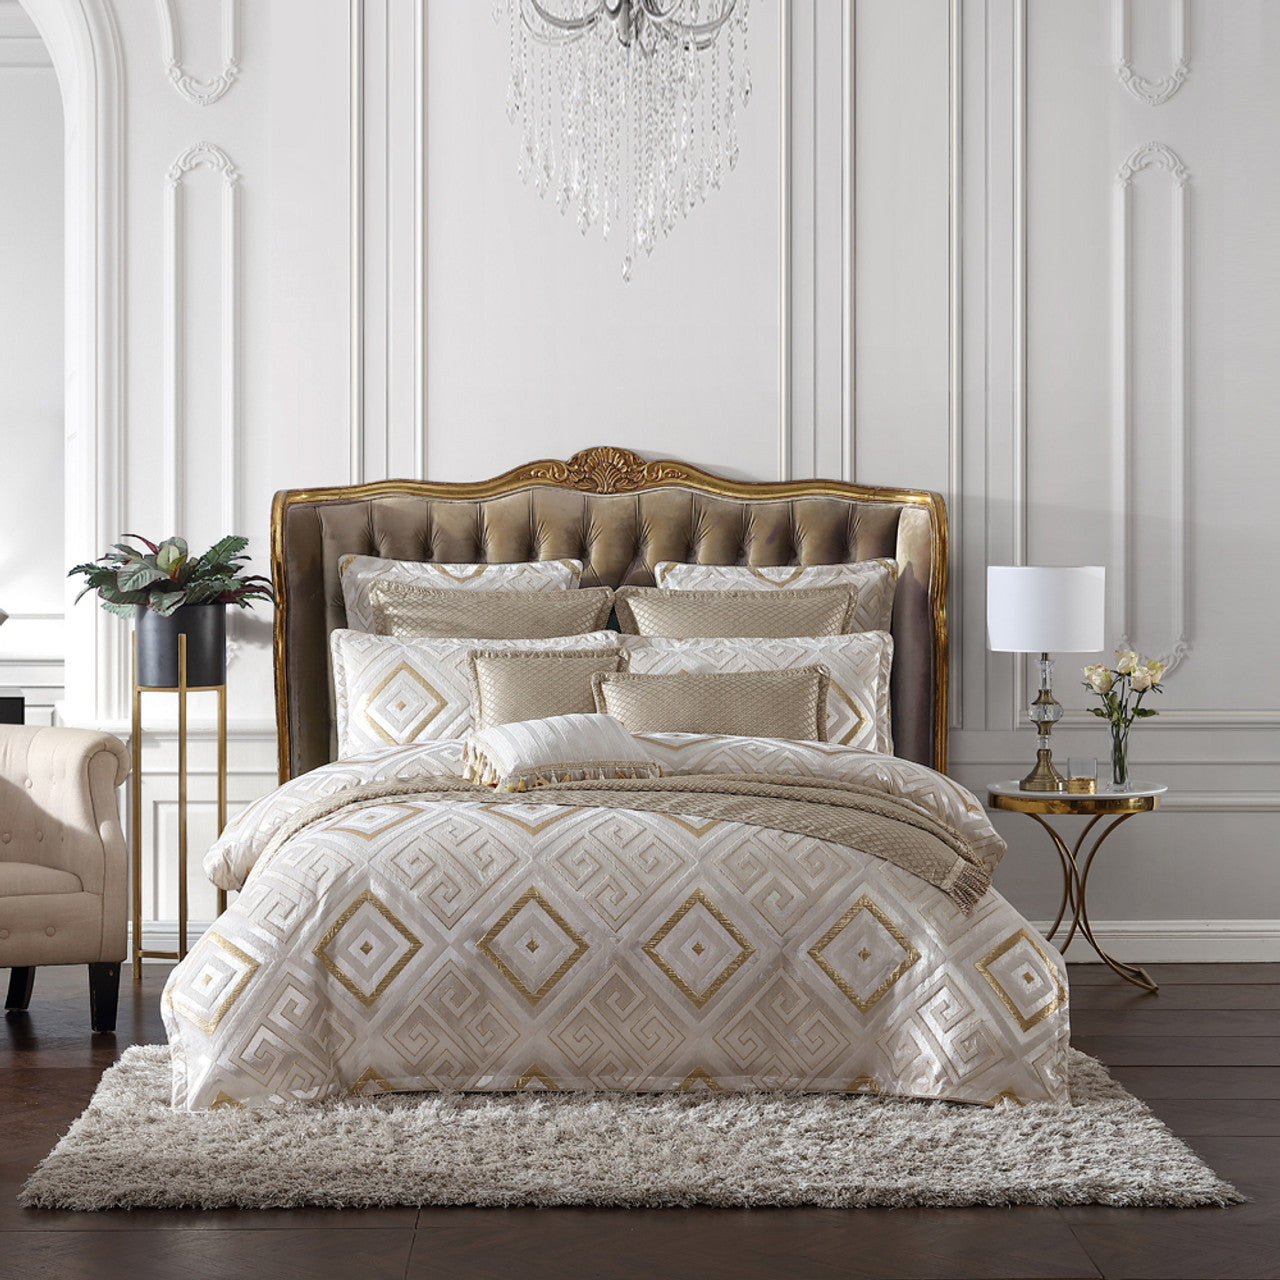 Elevate your bedroom with the opulent charm of the Davinci Santos Snow Bed Quilt Cover Set. This exquisite ensemble makes a statement of affluence and sophistication. The striking gold metallic accents beautifully illuminate the richly textured chenille fabric, featuring a traditional Greek key motif.